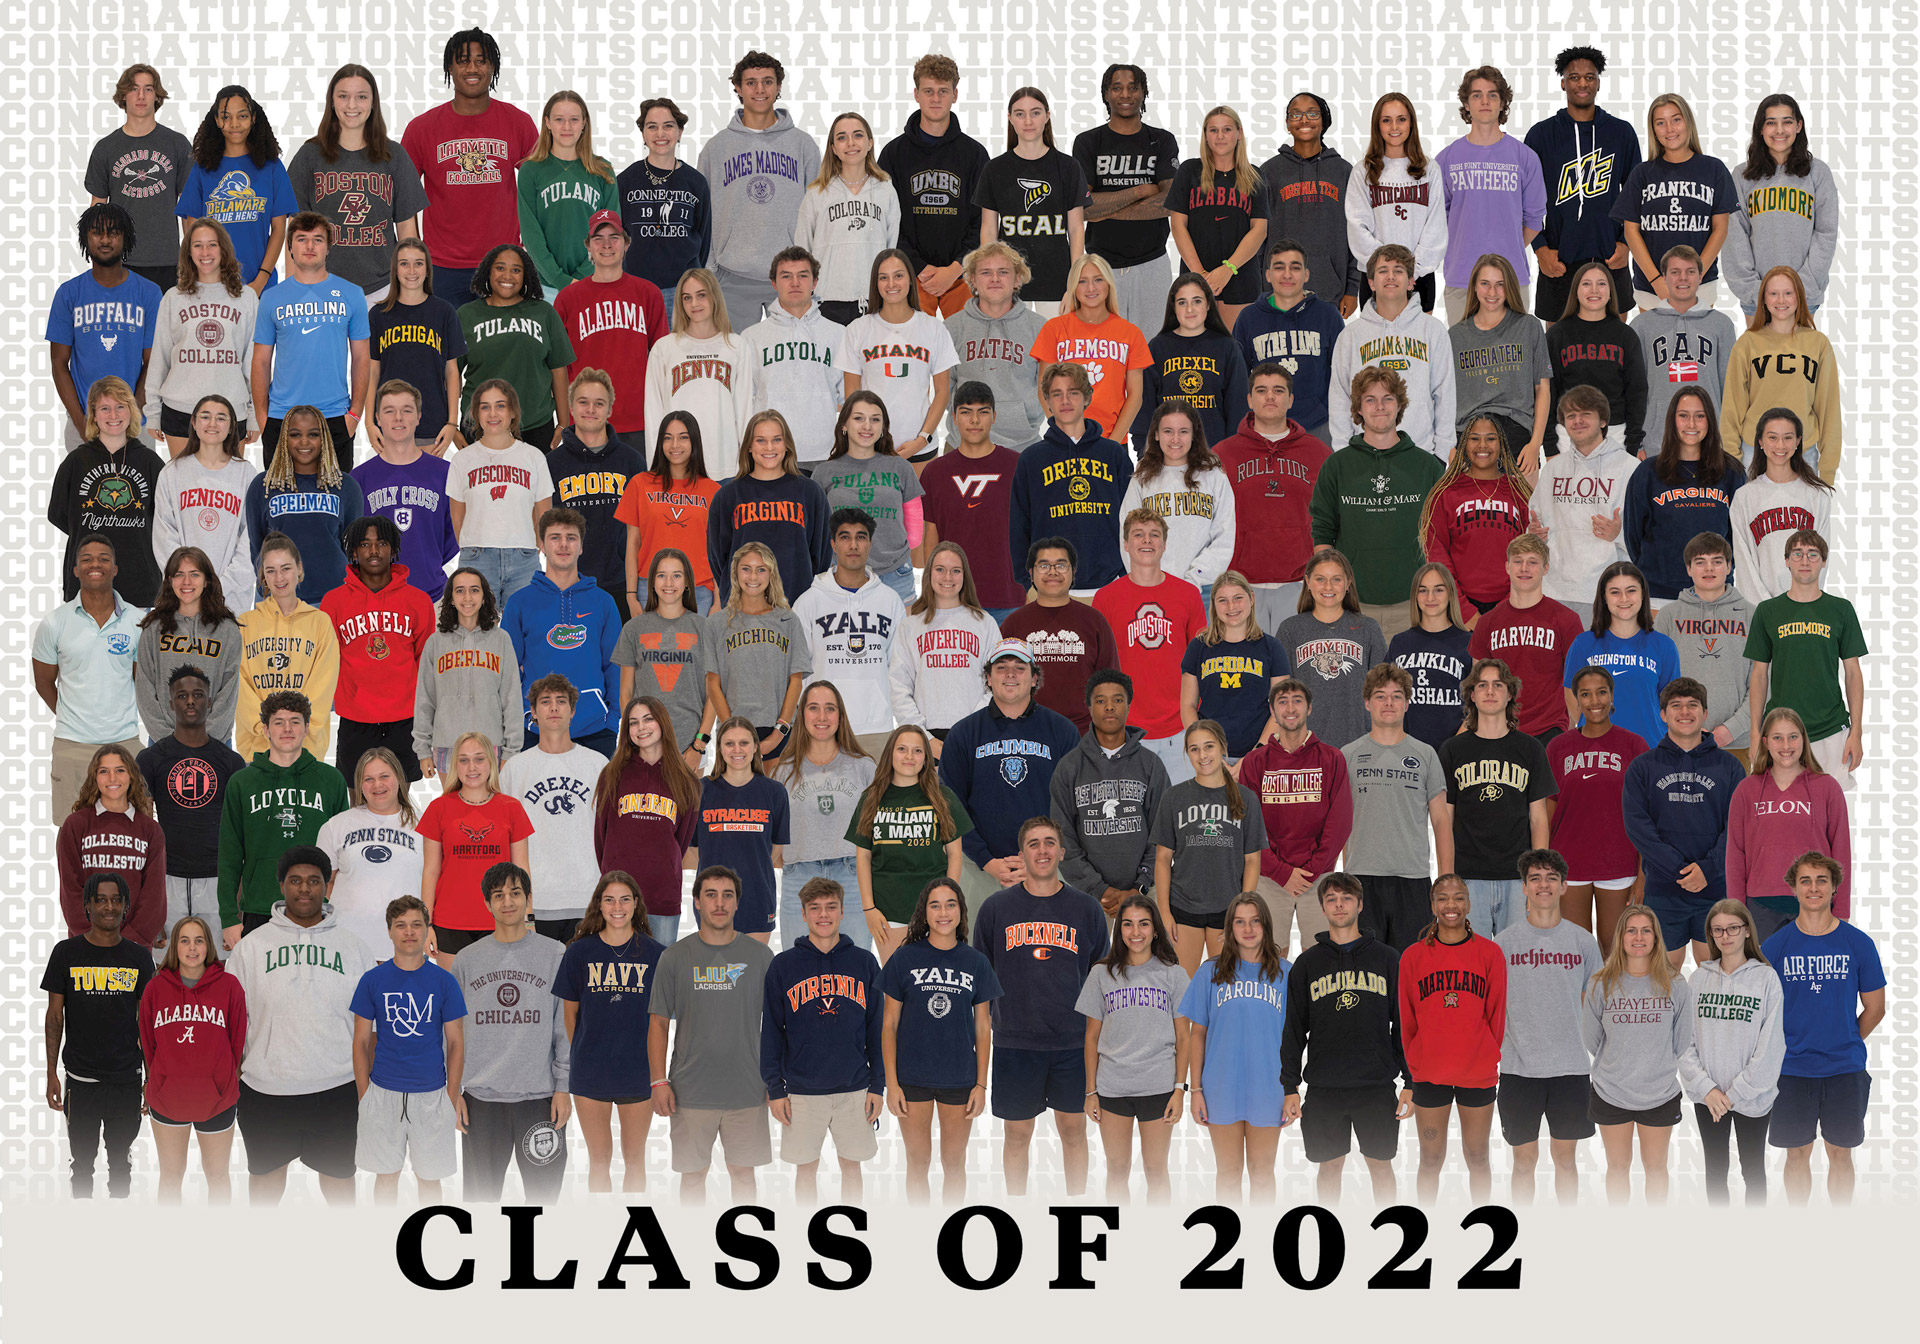 A photo showing the class of 2022